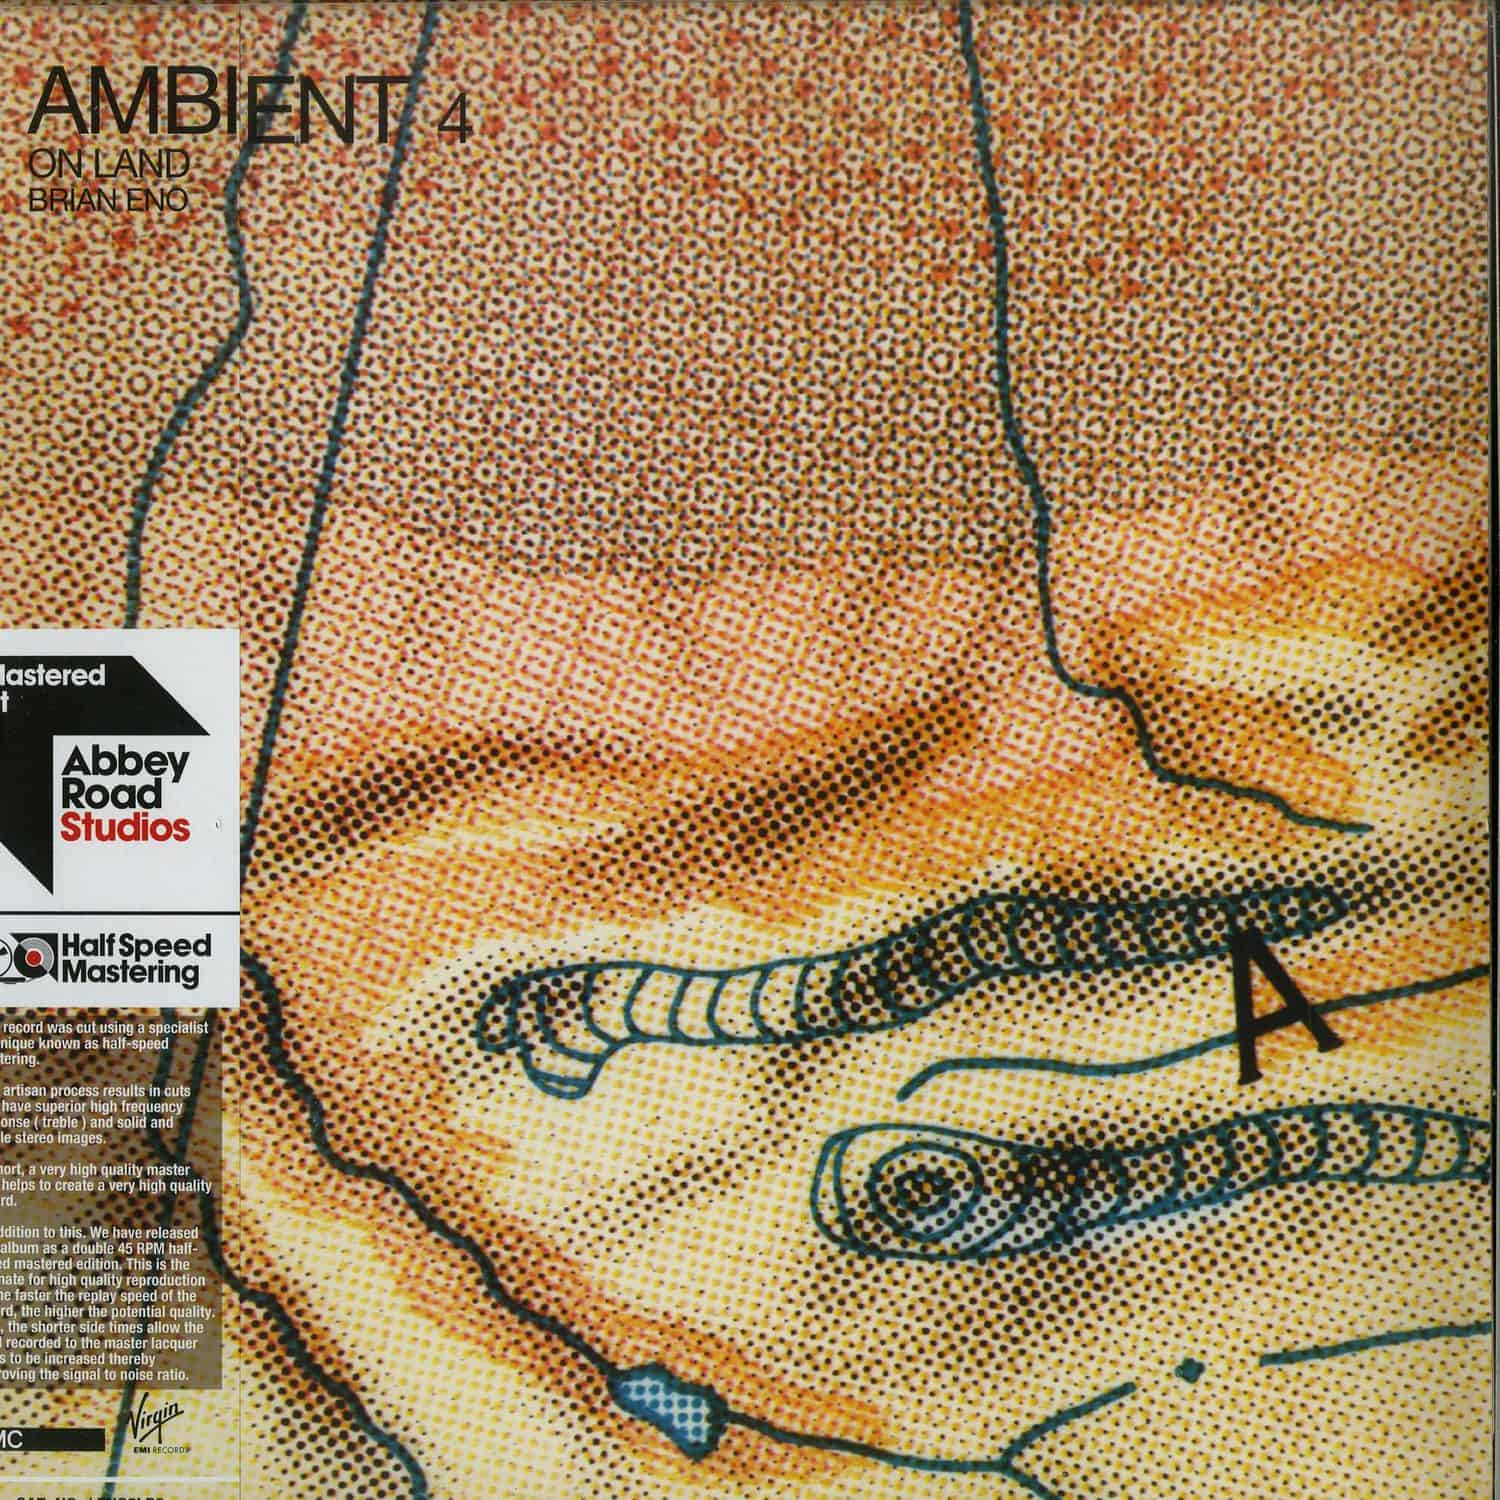 Brian Eno - AMBIENT 4: ON LAND 